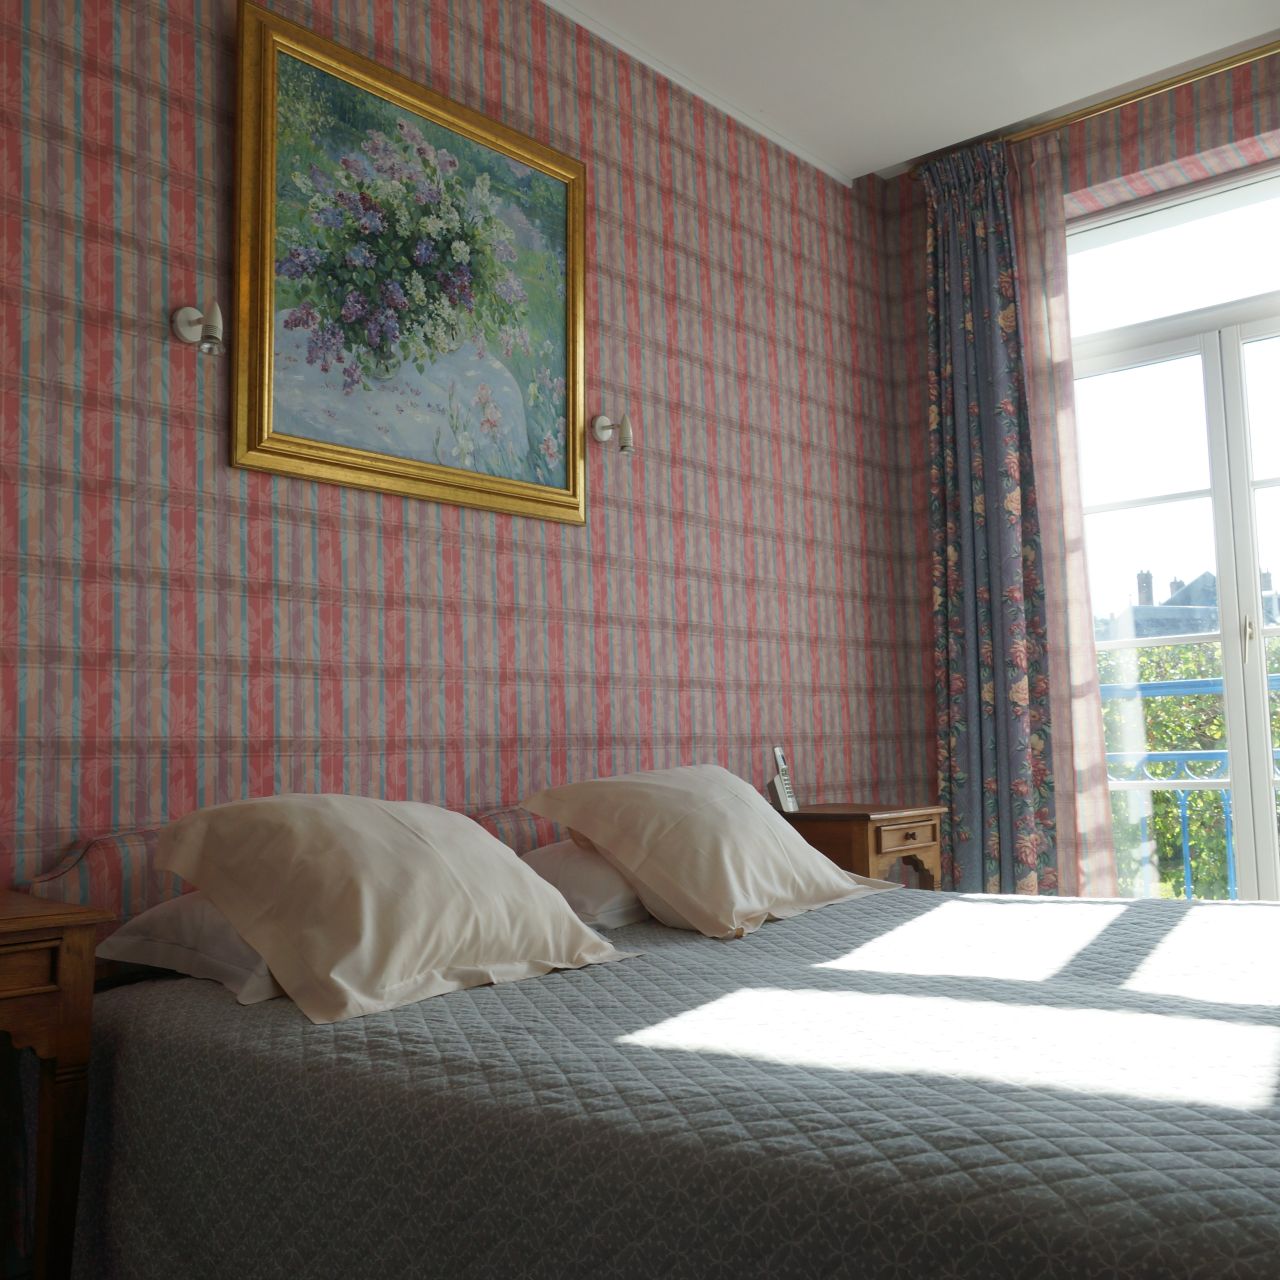 Hotel La Diligence - Honfleur - Great prices at HOTEL INFO